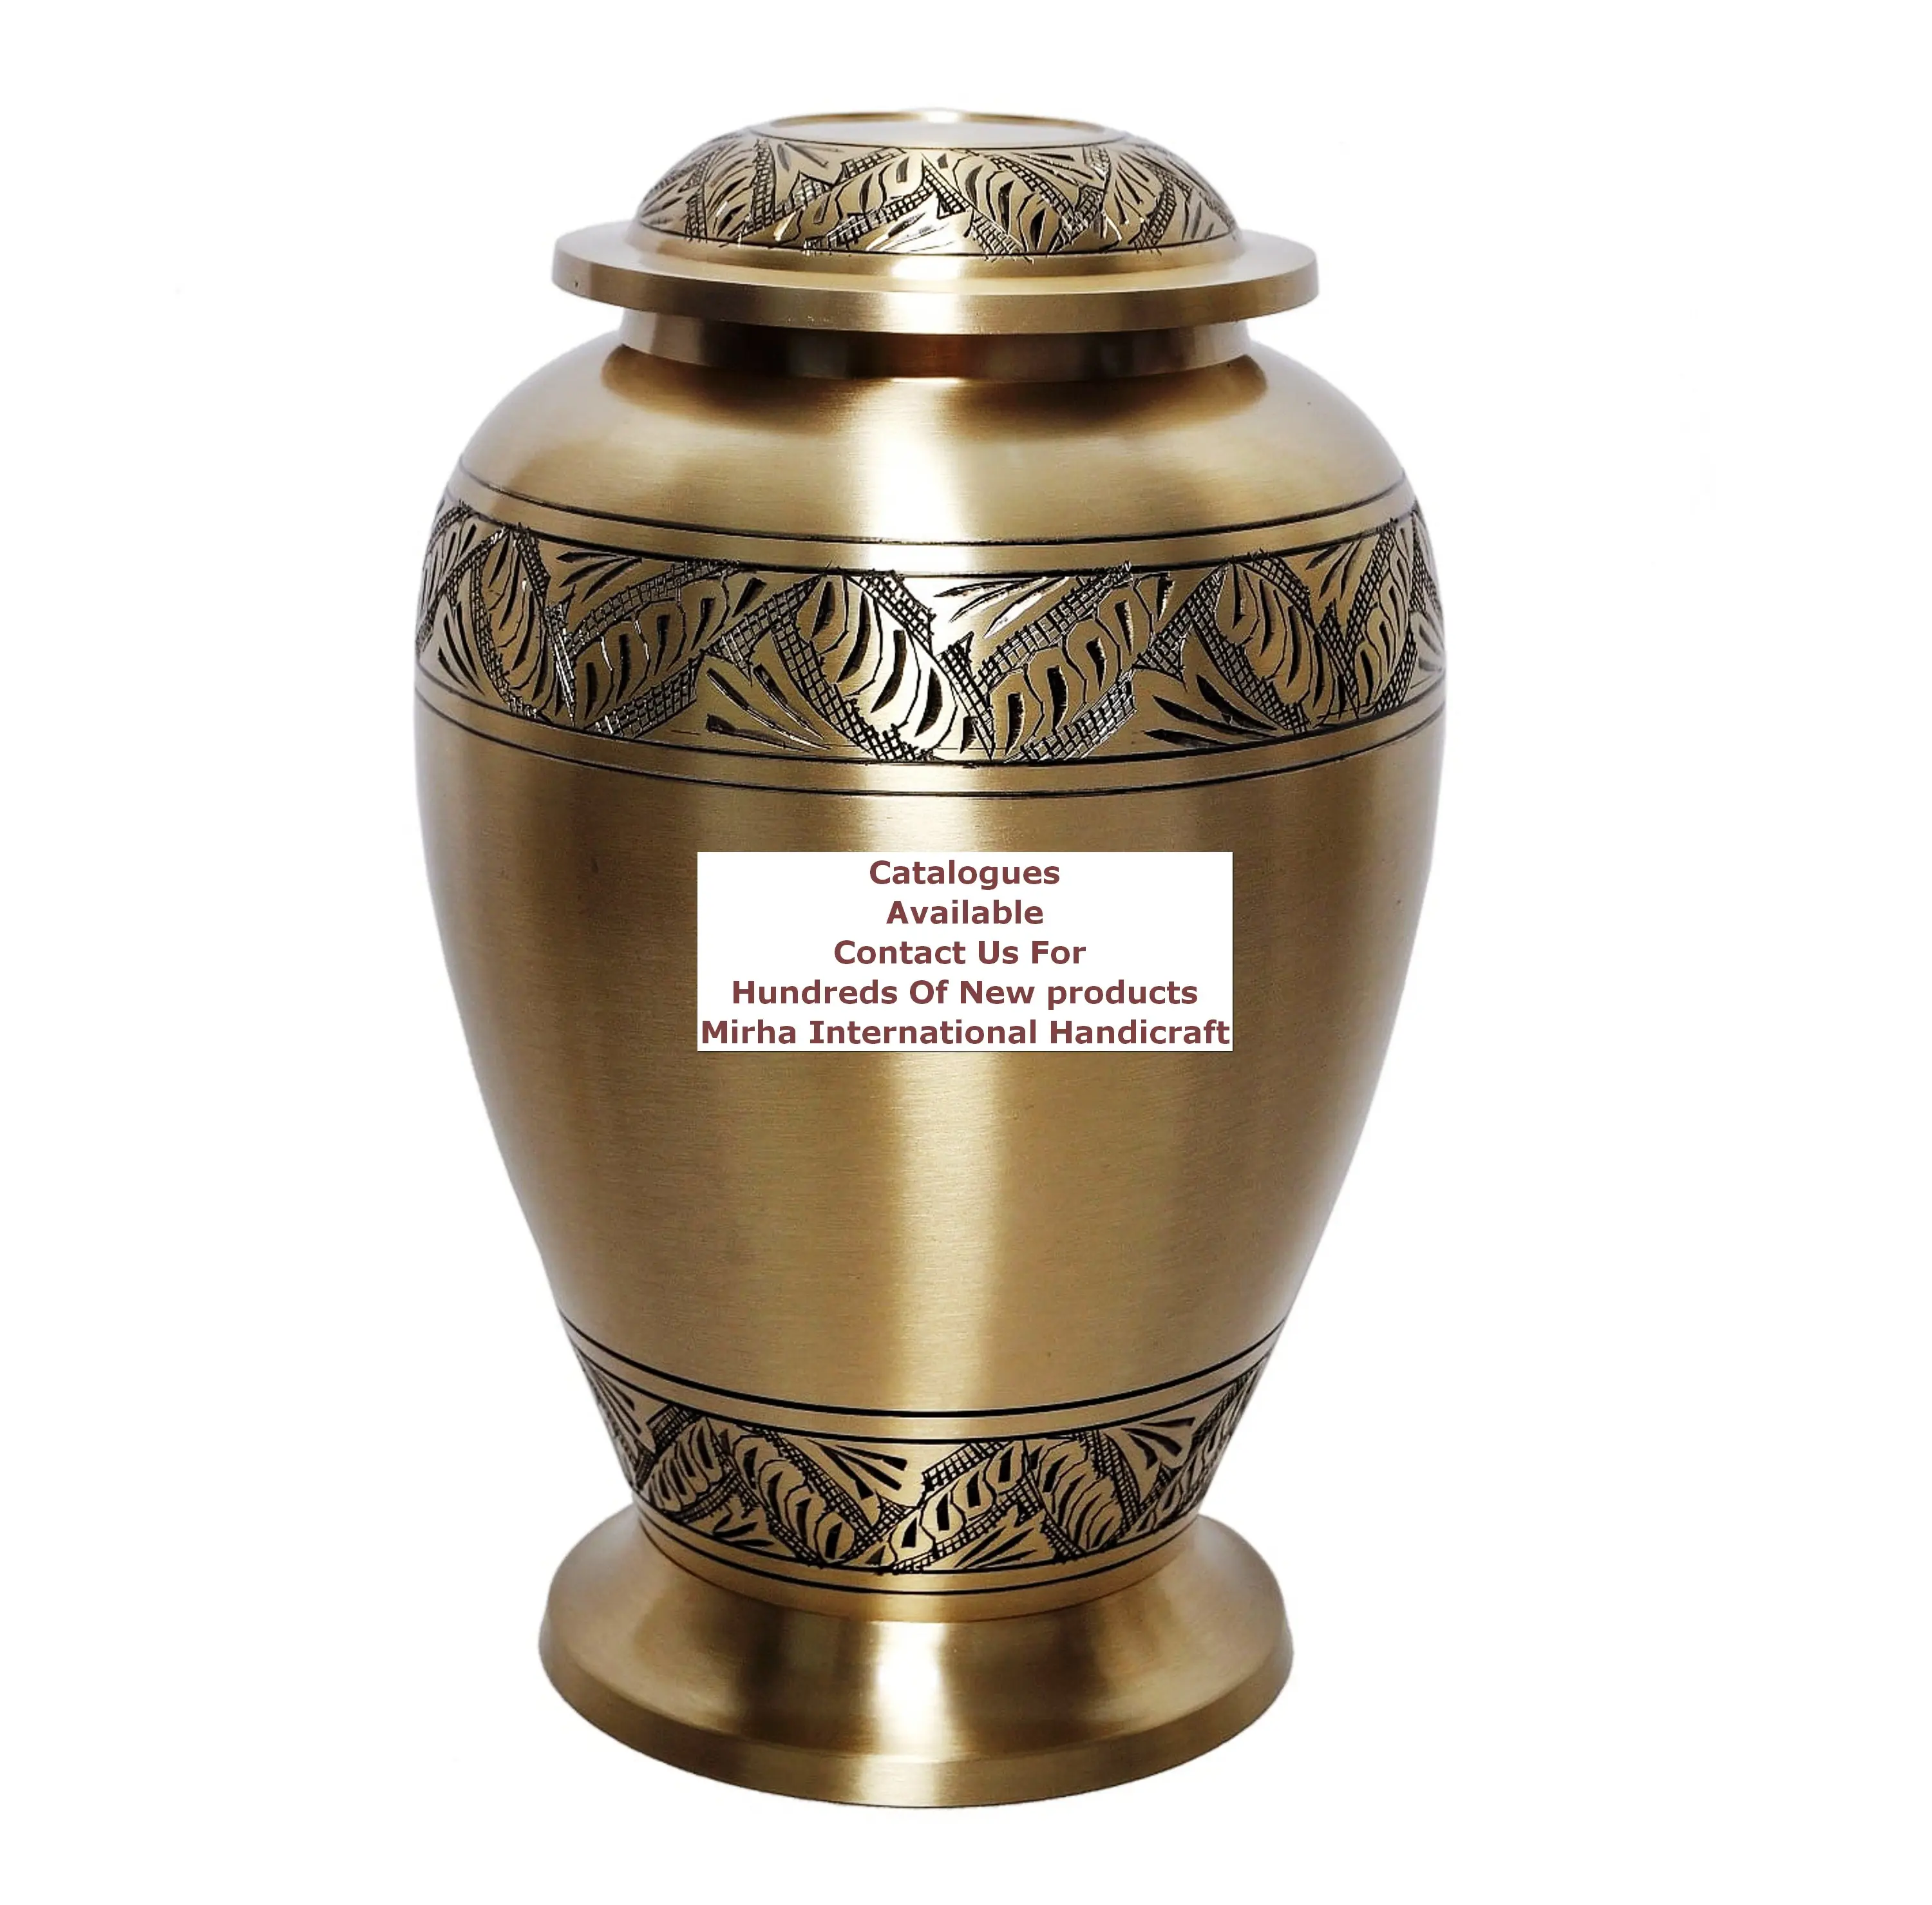 Floral Cremation Urn Bronze Finish Large Cremation Urns for Women and Mann Burial Decorative Made In India